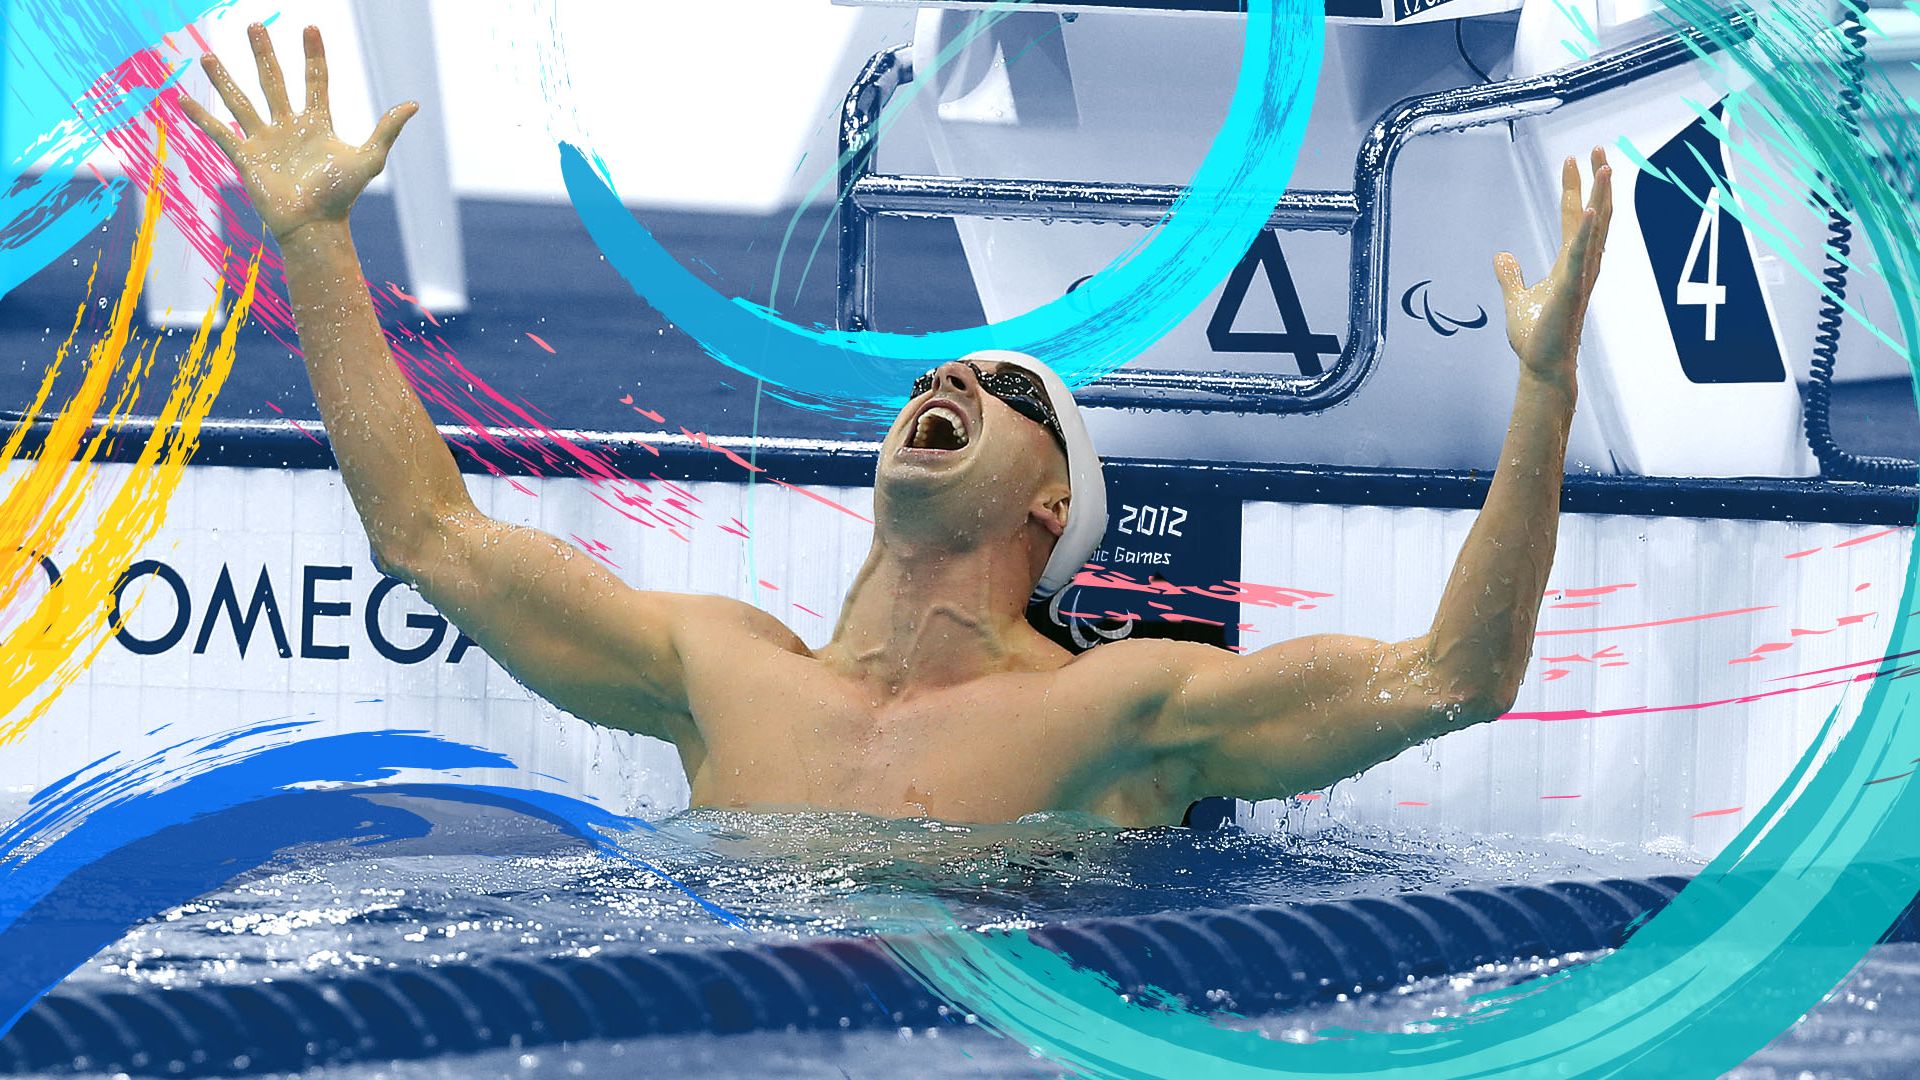 Benoît Huot celebrates after winning gold in the men’s 200m individual medley at the 2012 London Paralympics.